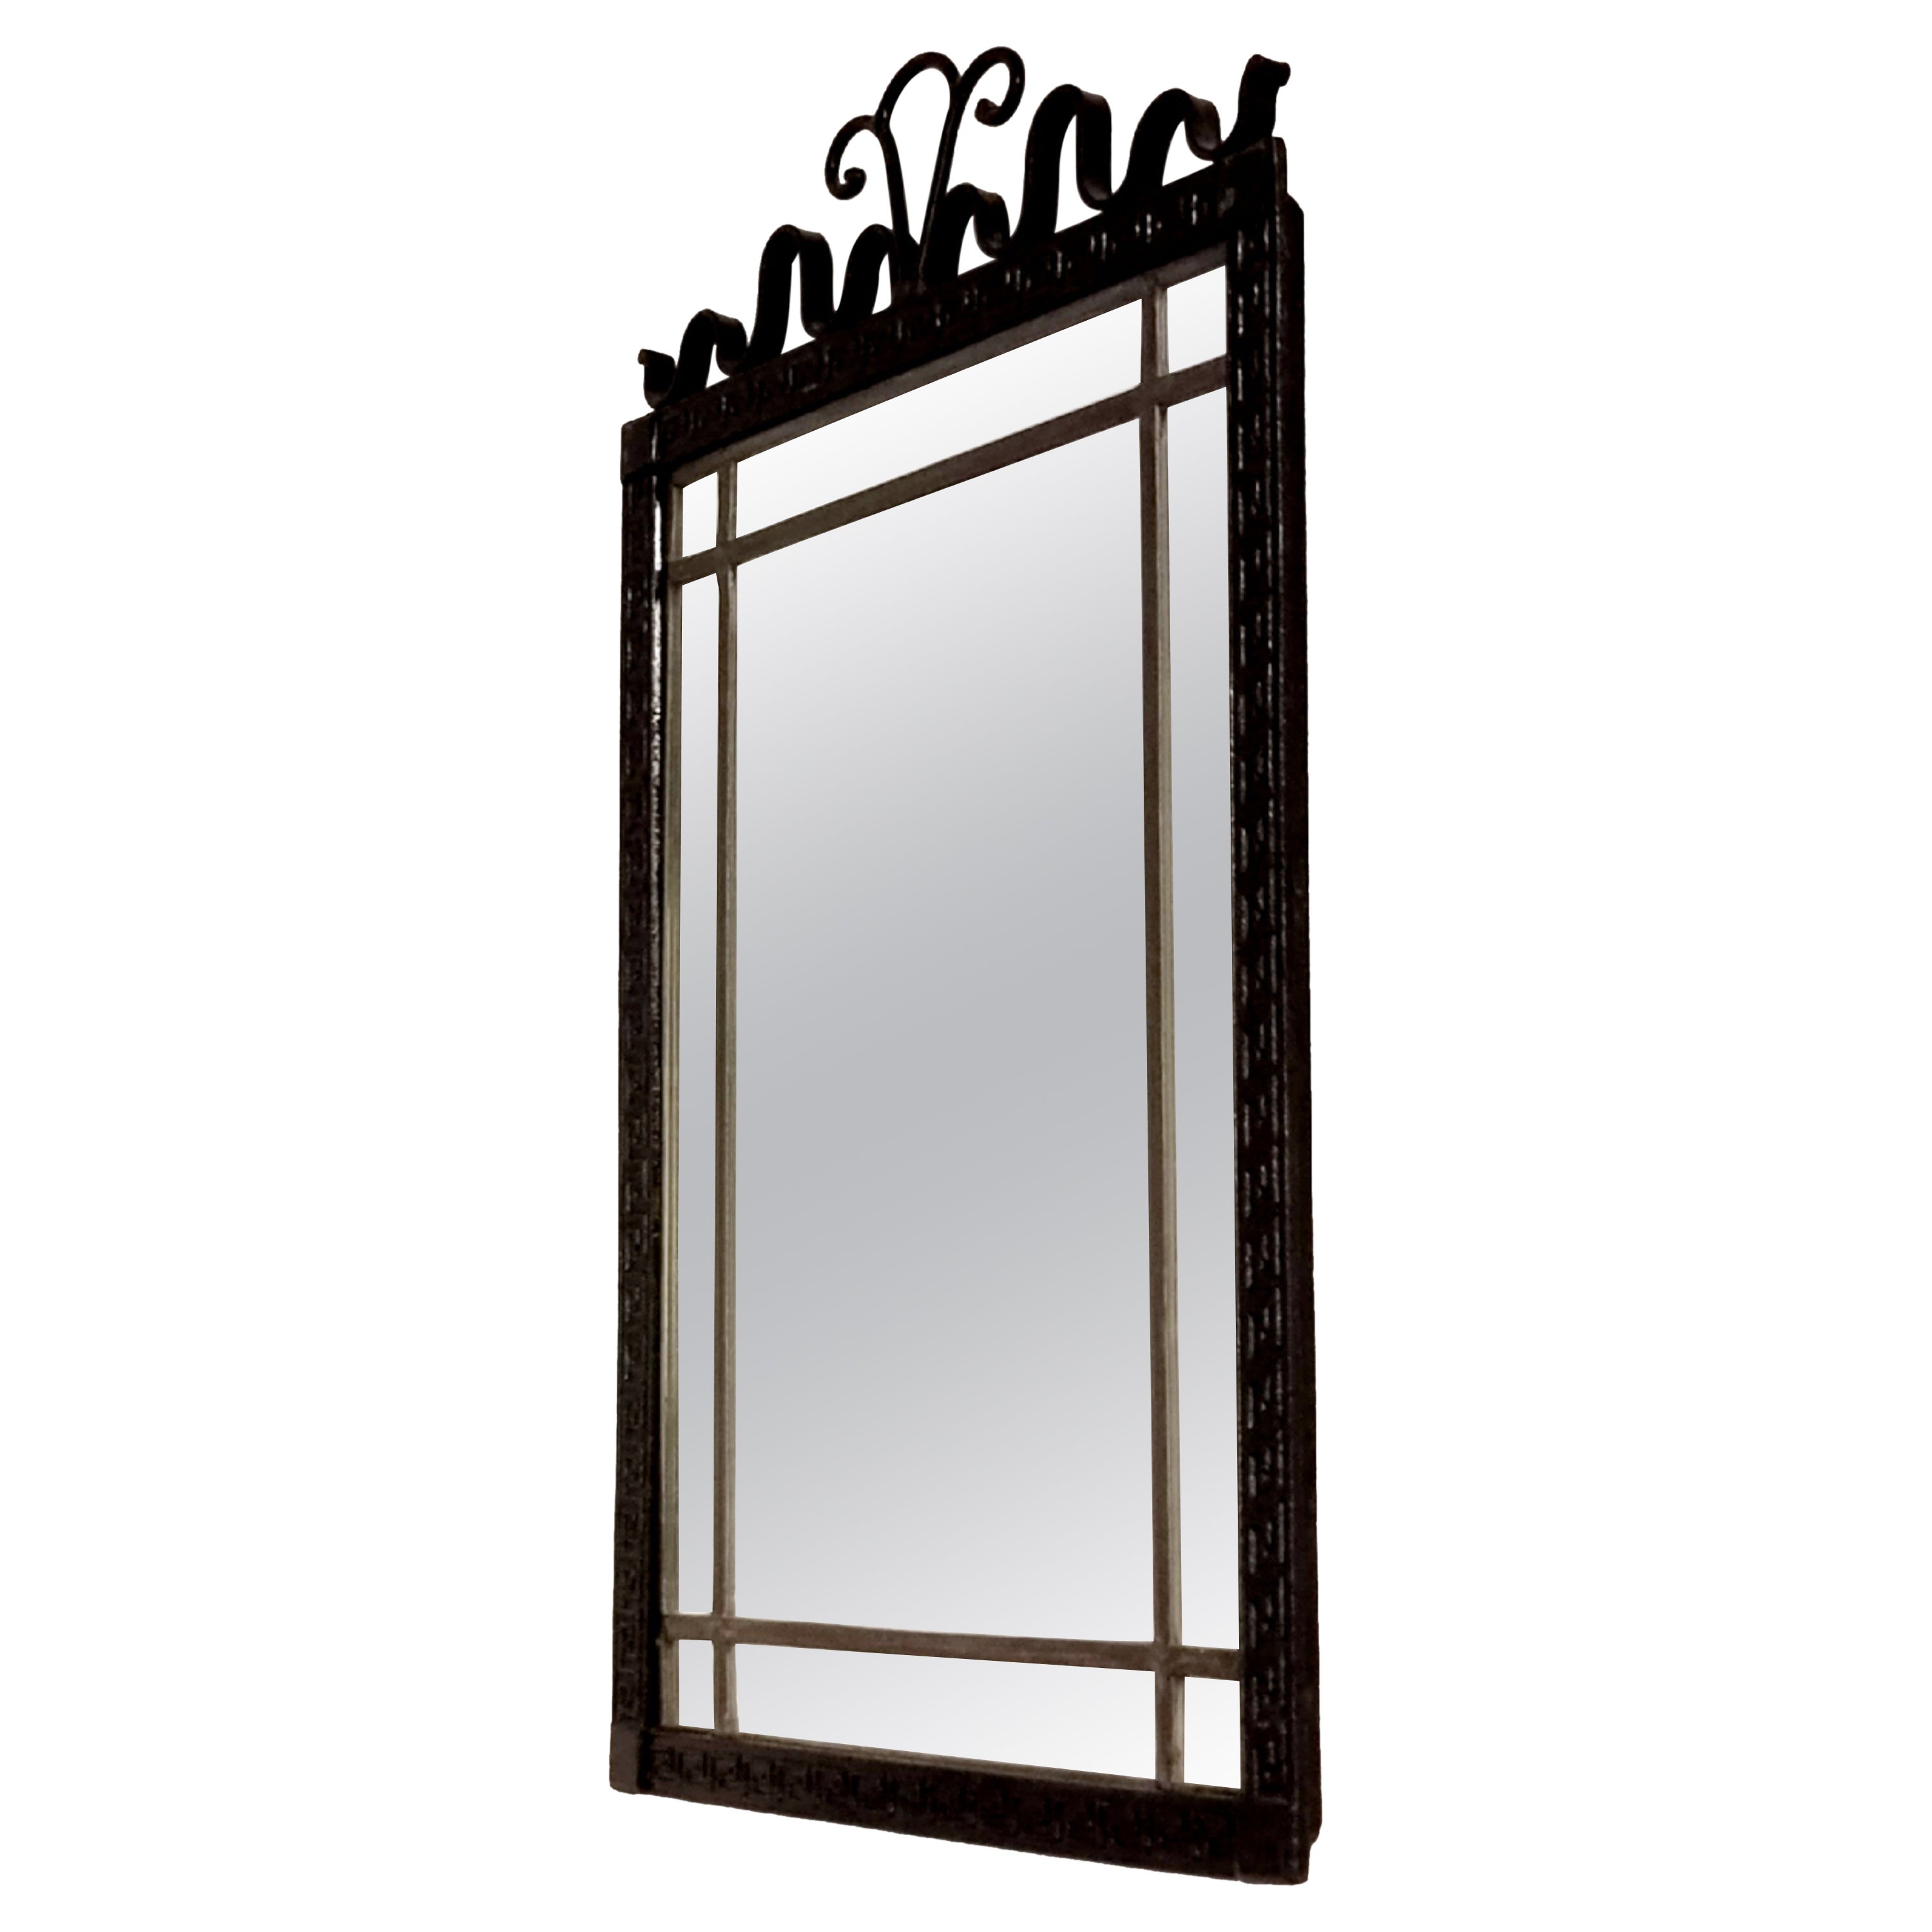 Swedish Grace / Art Deco, mirror in cast iron with meander patterned frame